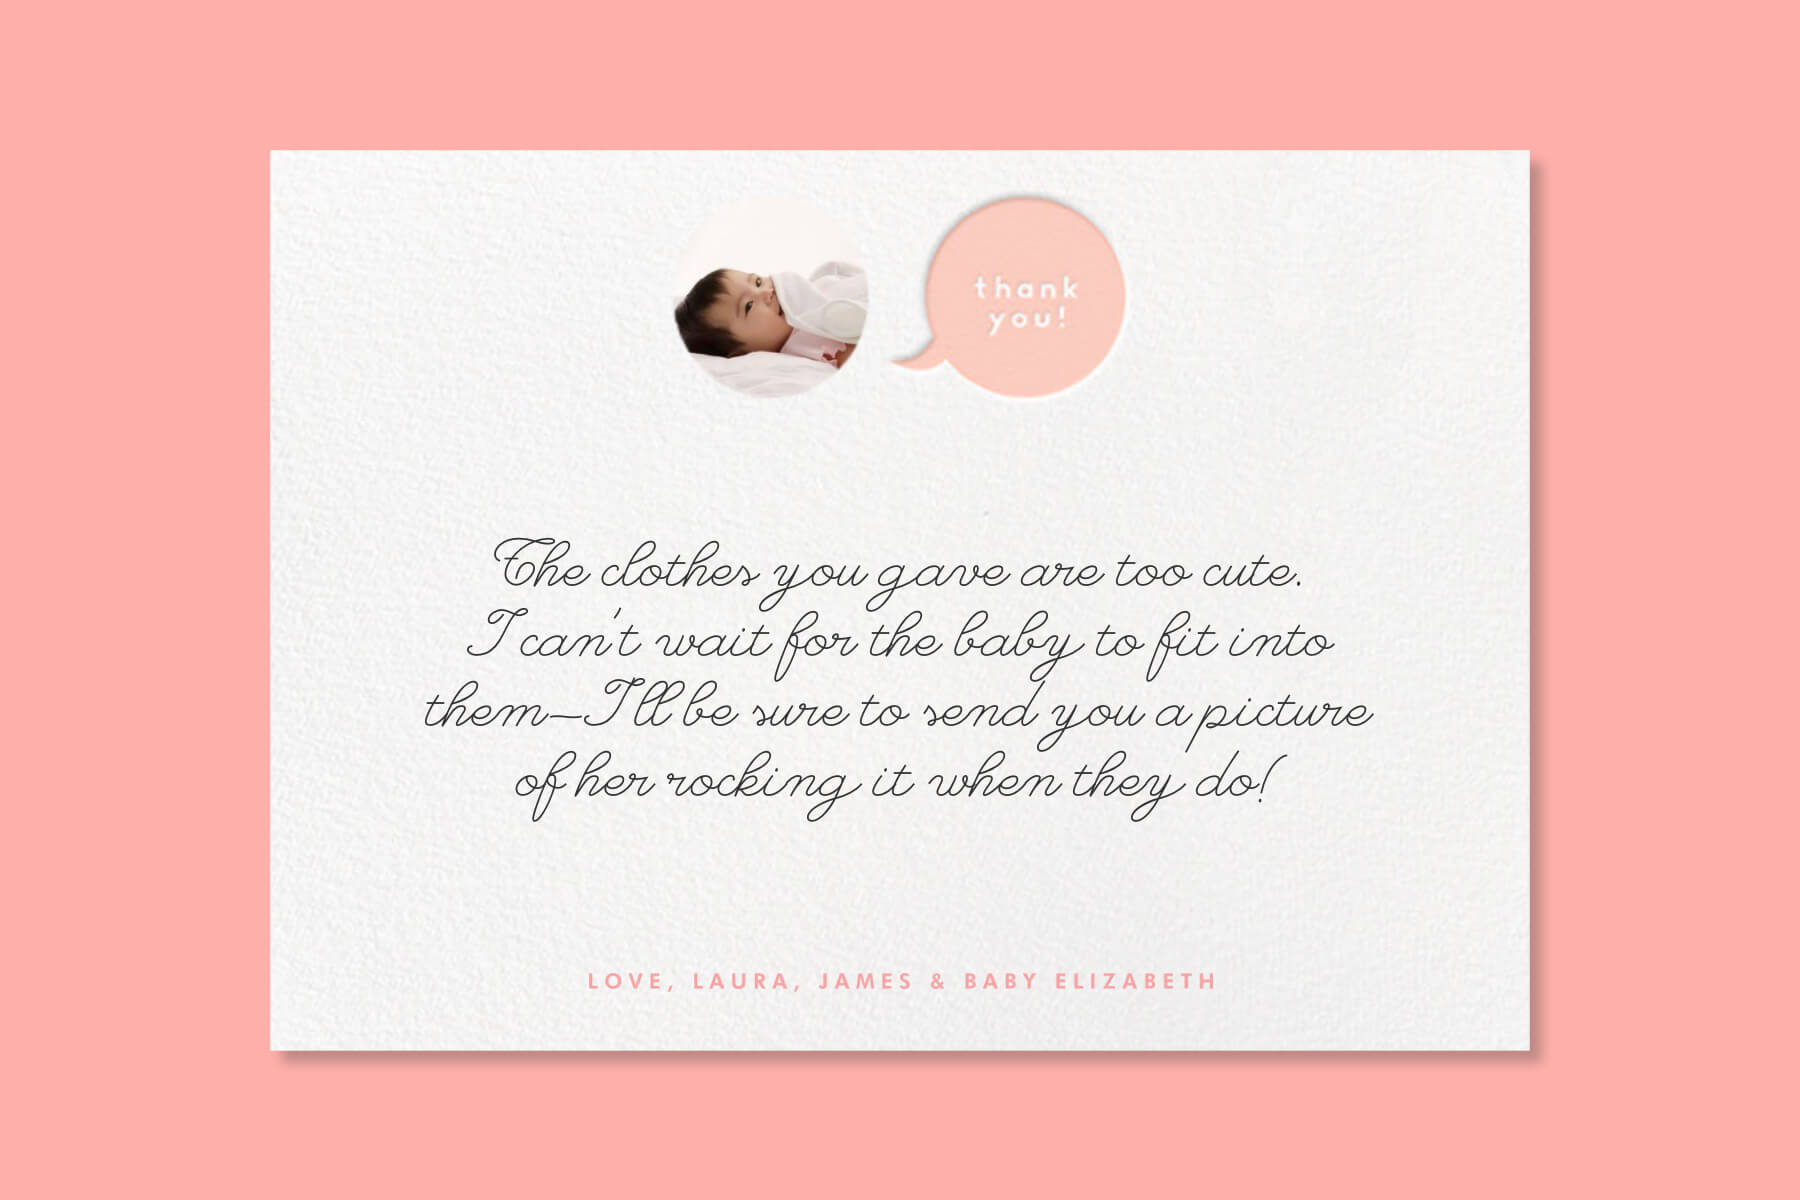 Baby Shower Thank You Wording - Paperless Post With Template For Baby Shower Thank You Cards